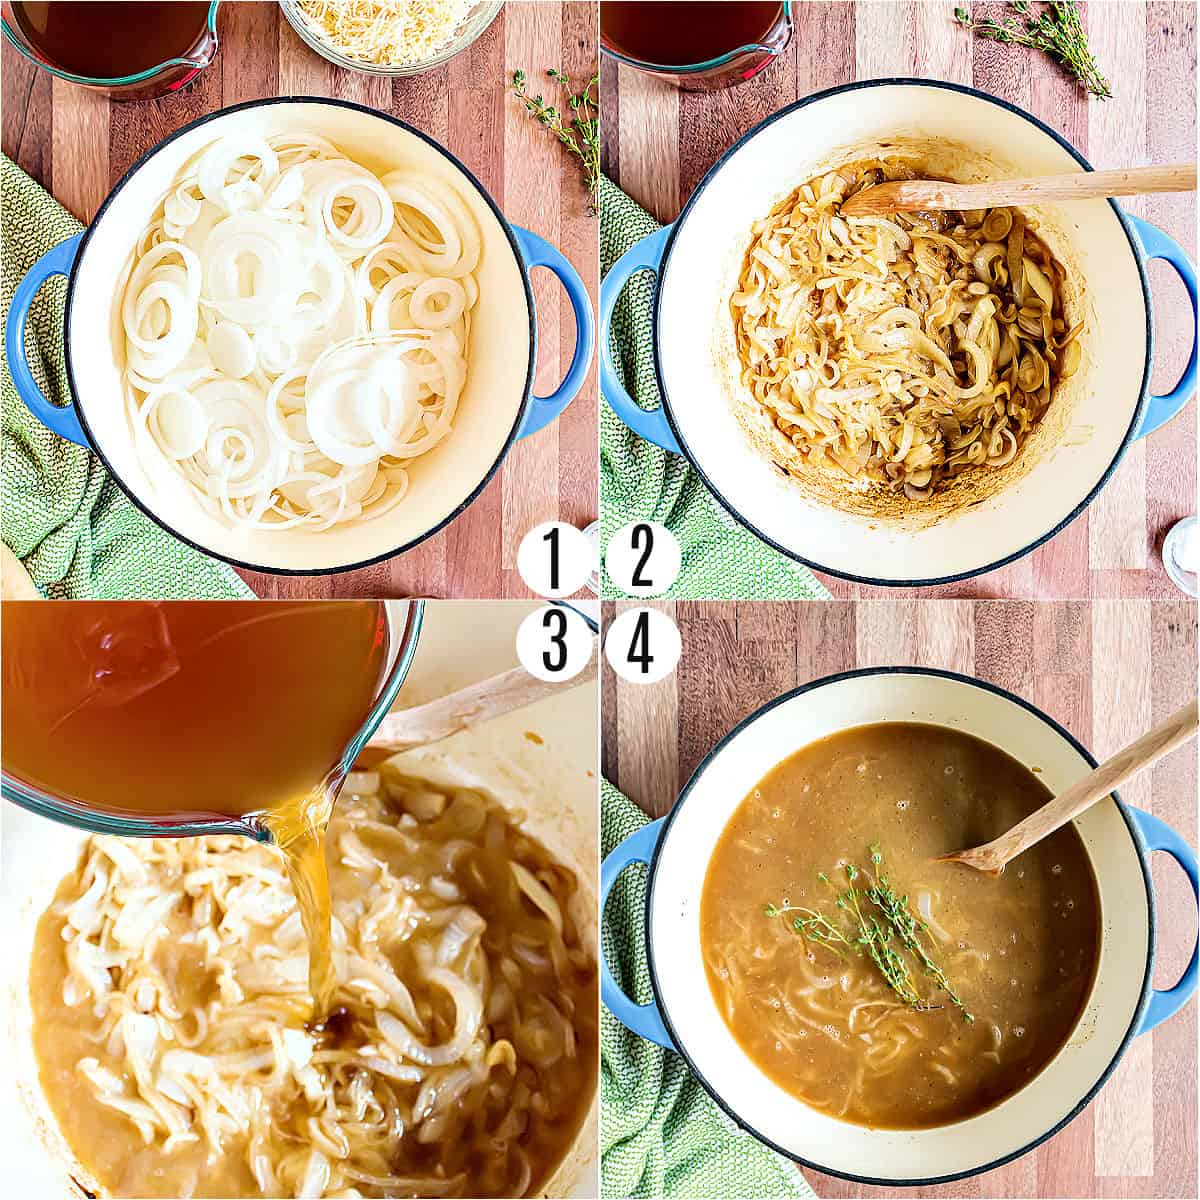 Step by step photos showing how to make french onion soup.